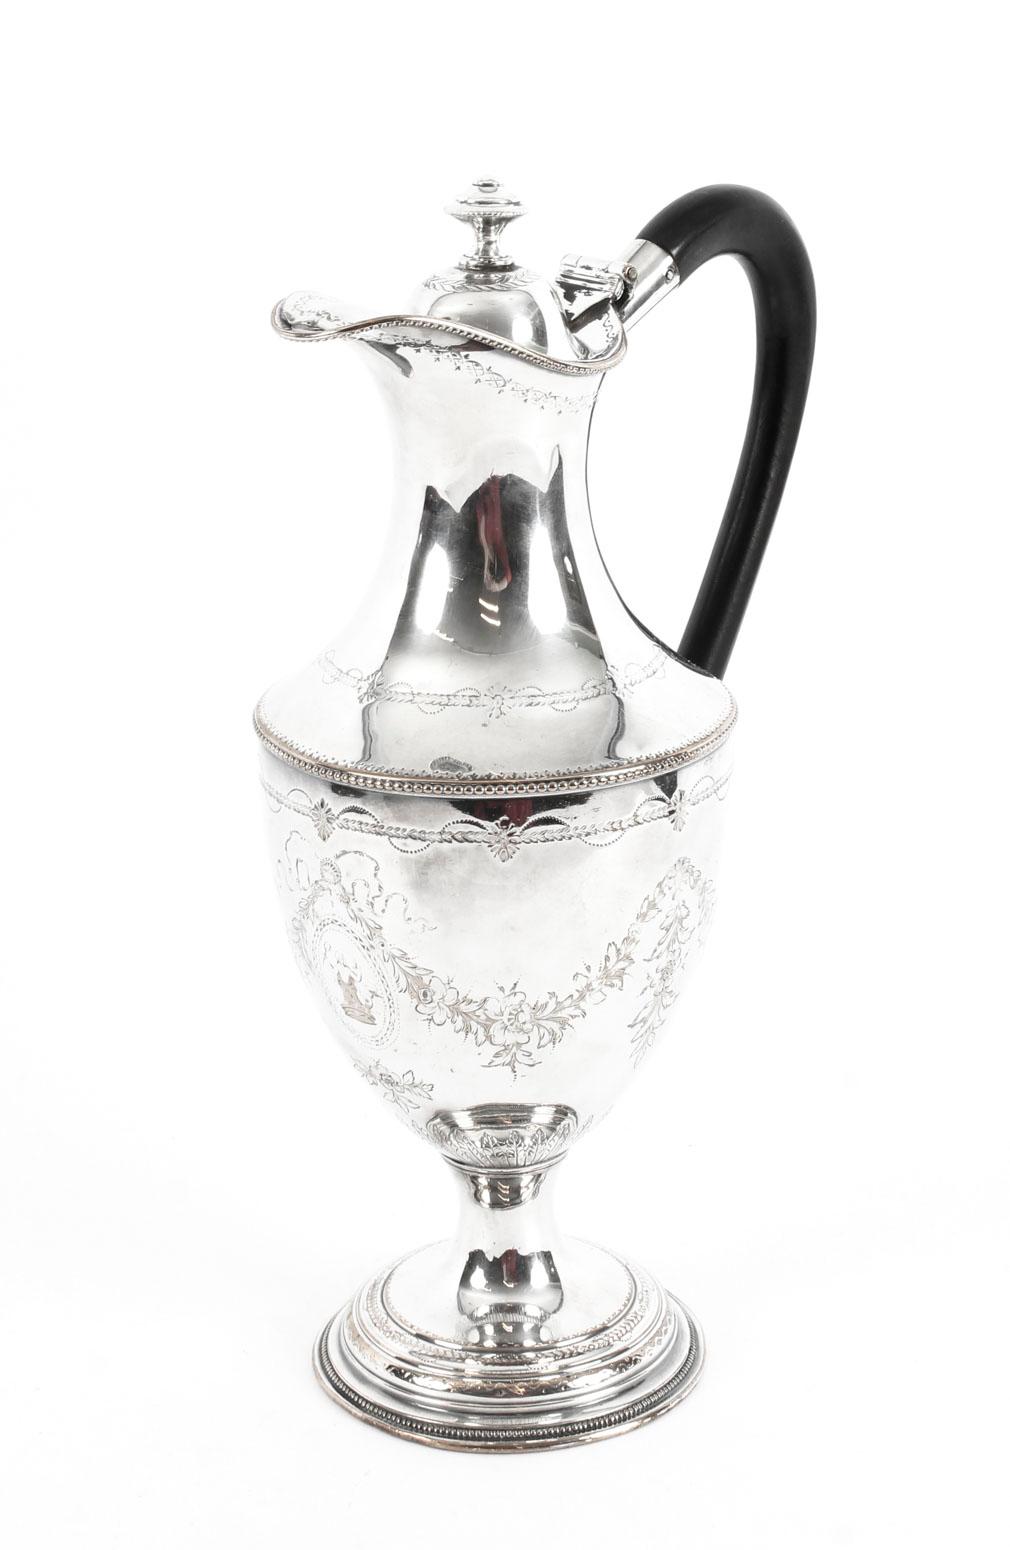 This is a fabulous antique Old Sheffield plate 18th century silver on copper claret jug, circa 1780 in date.

The claret jug is of baluster form and has an attractive circular foot. It is profusely engraved with shapes including ribbons, bows and